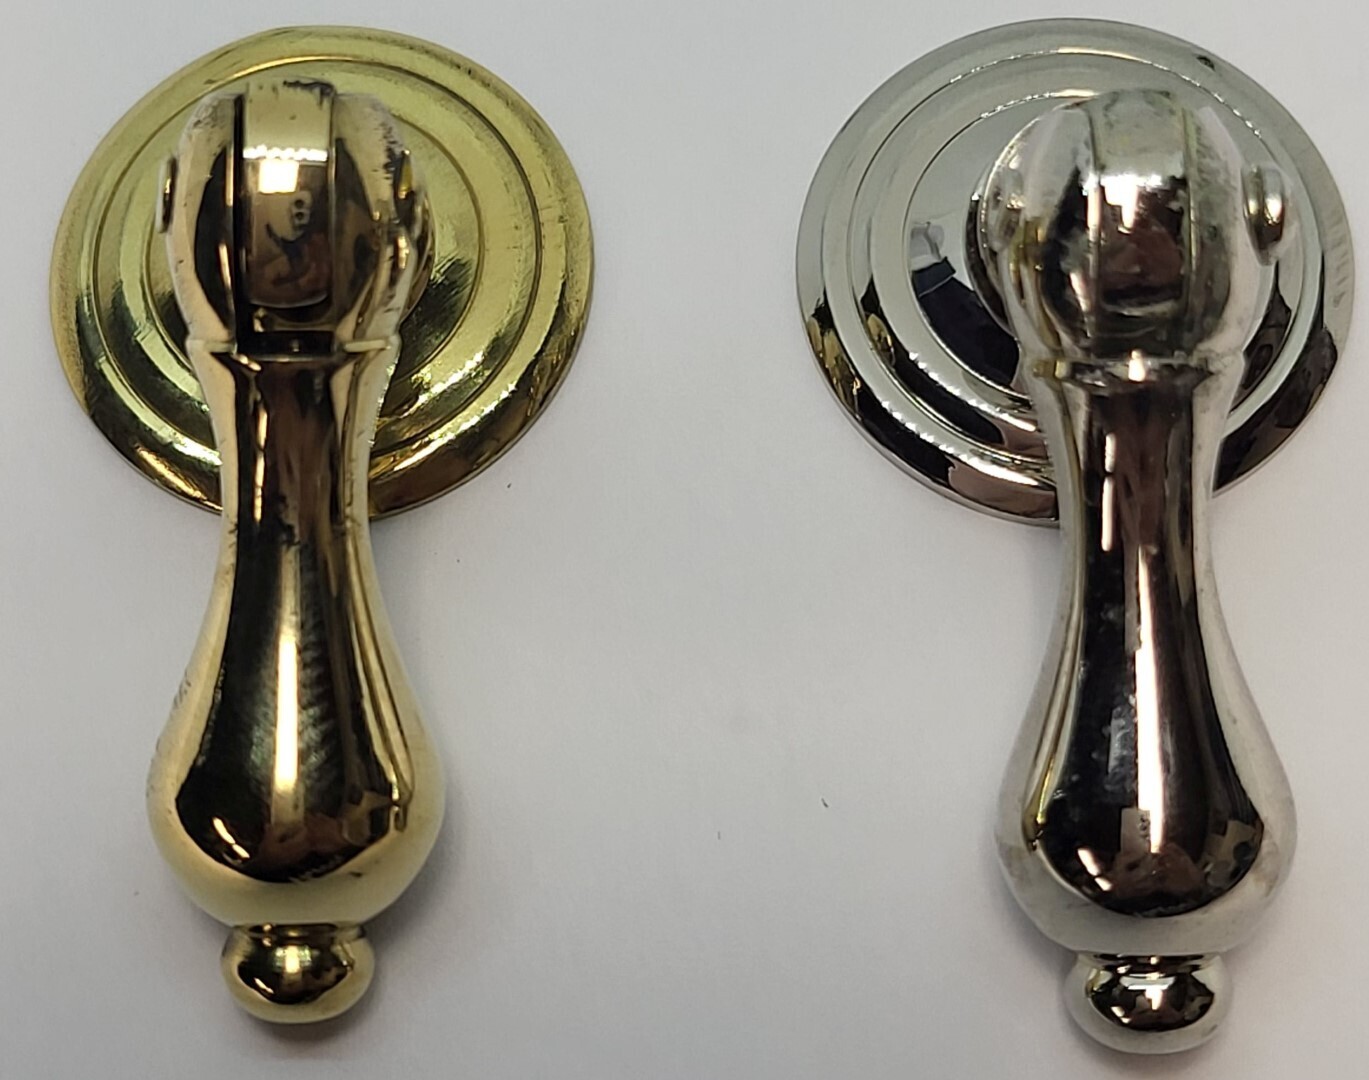 Queen Ann Colonial Revival Early American Single Post Teardrop Pull Solid Brass Nickel chased antique vintage retro fancy decorative knob handle mid century modern hanging